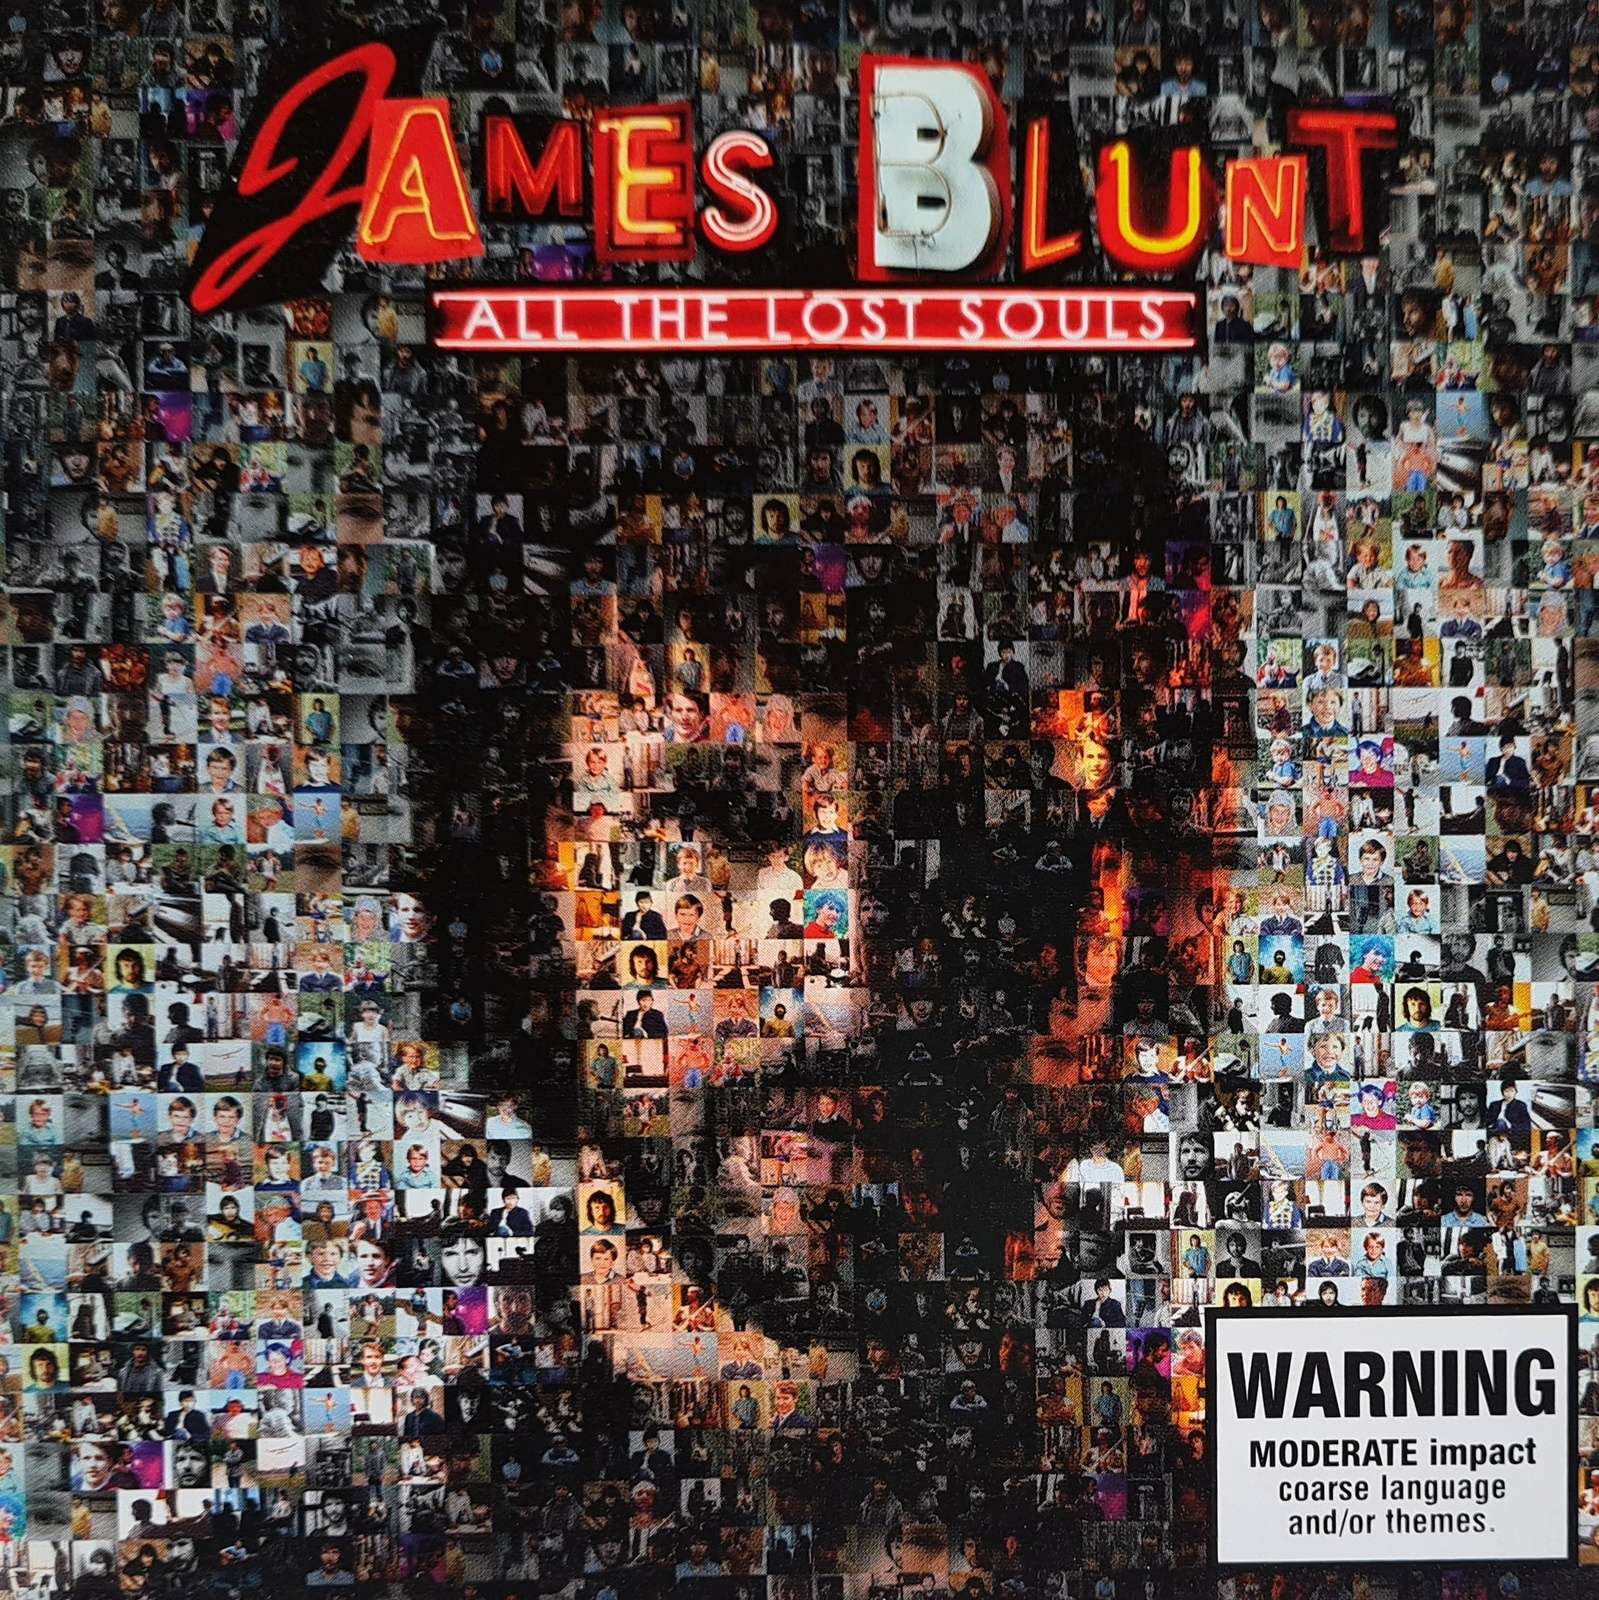 James Blunt - All the Lost Souls (CD)